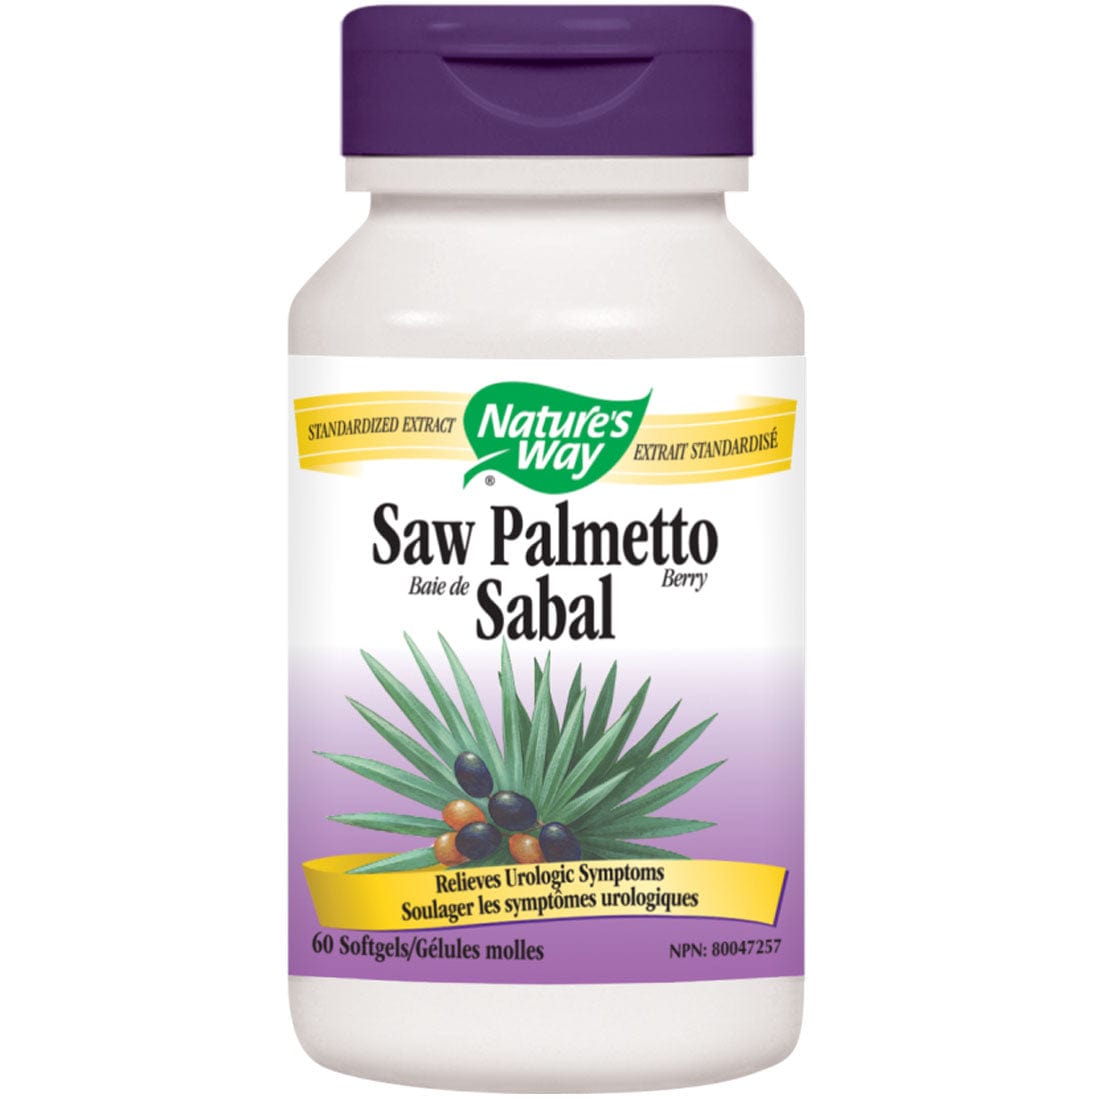 Nature's Way Saw Palmetto Standardized Extract